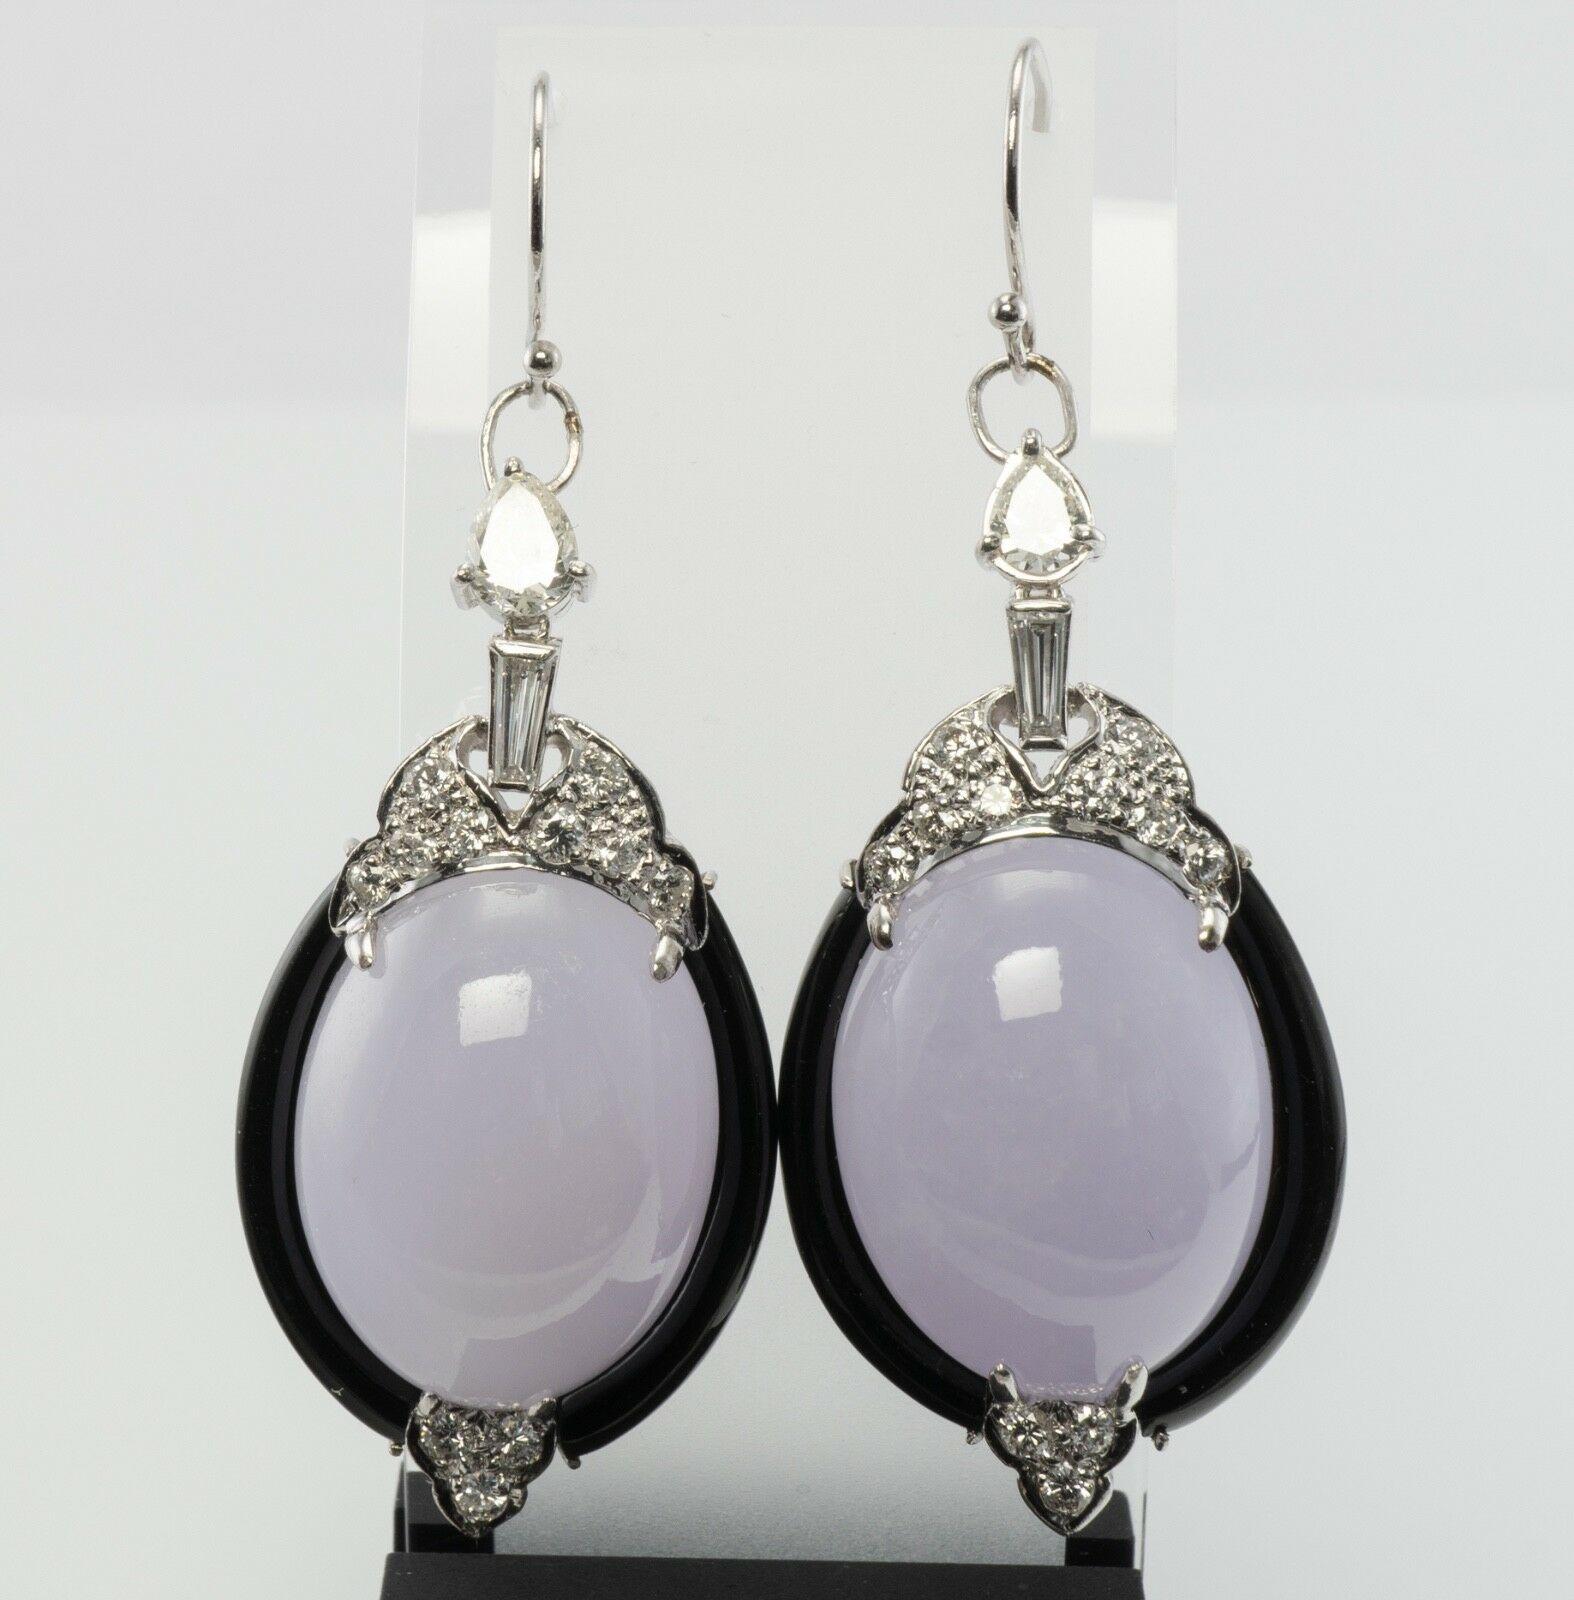 These gorgeous estate earrings are finely crafted in solid 14K White gold and set with genuine Chalcedony, Black Onyx, and diamonds. Each Chalcedony cabochon measures 21mm x 16mm. These gems have a pale purple color. Stunning stones! Black onyx